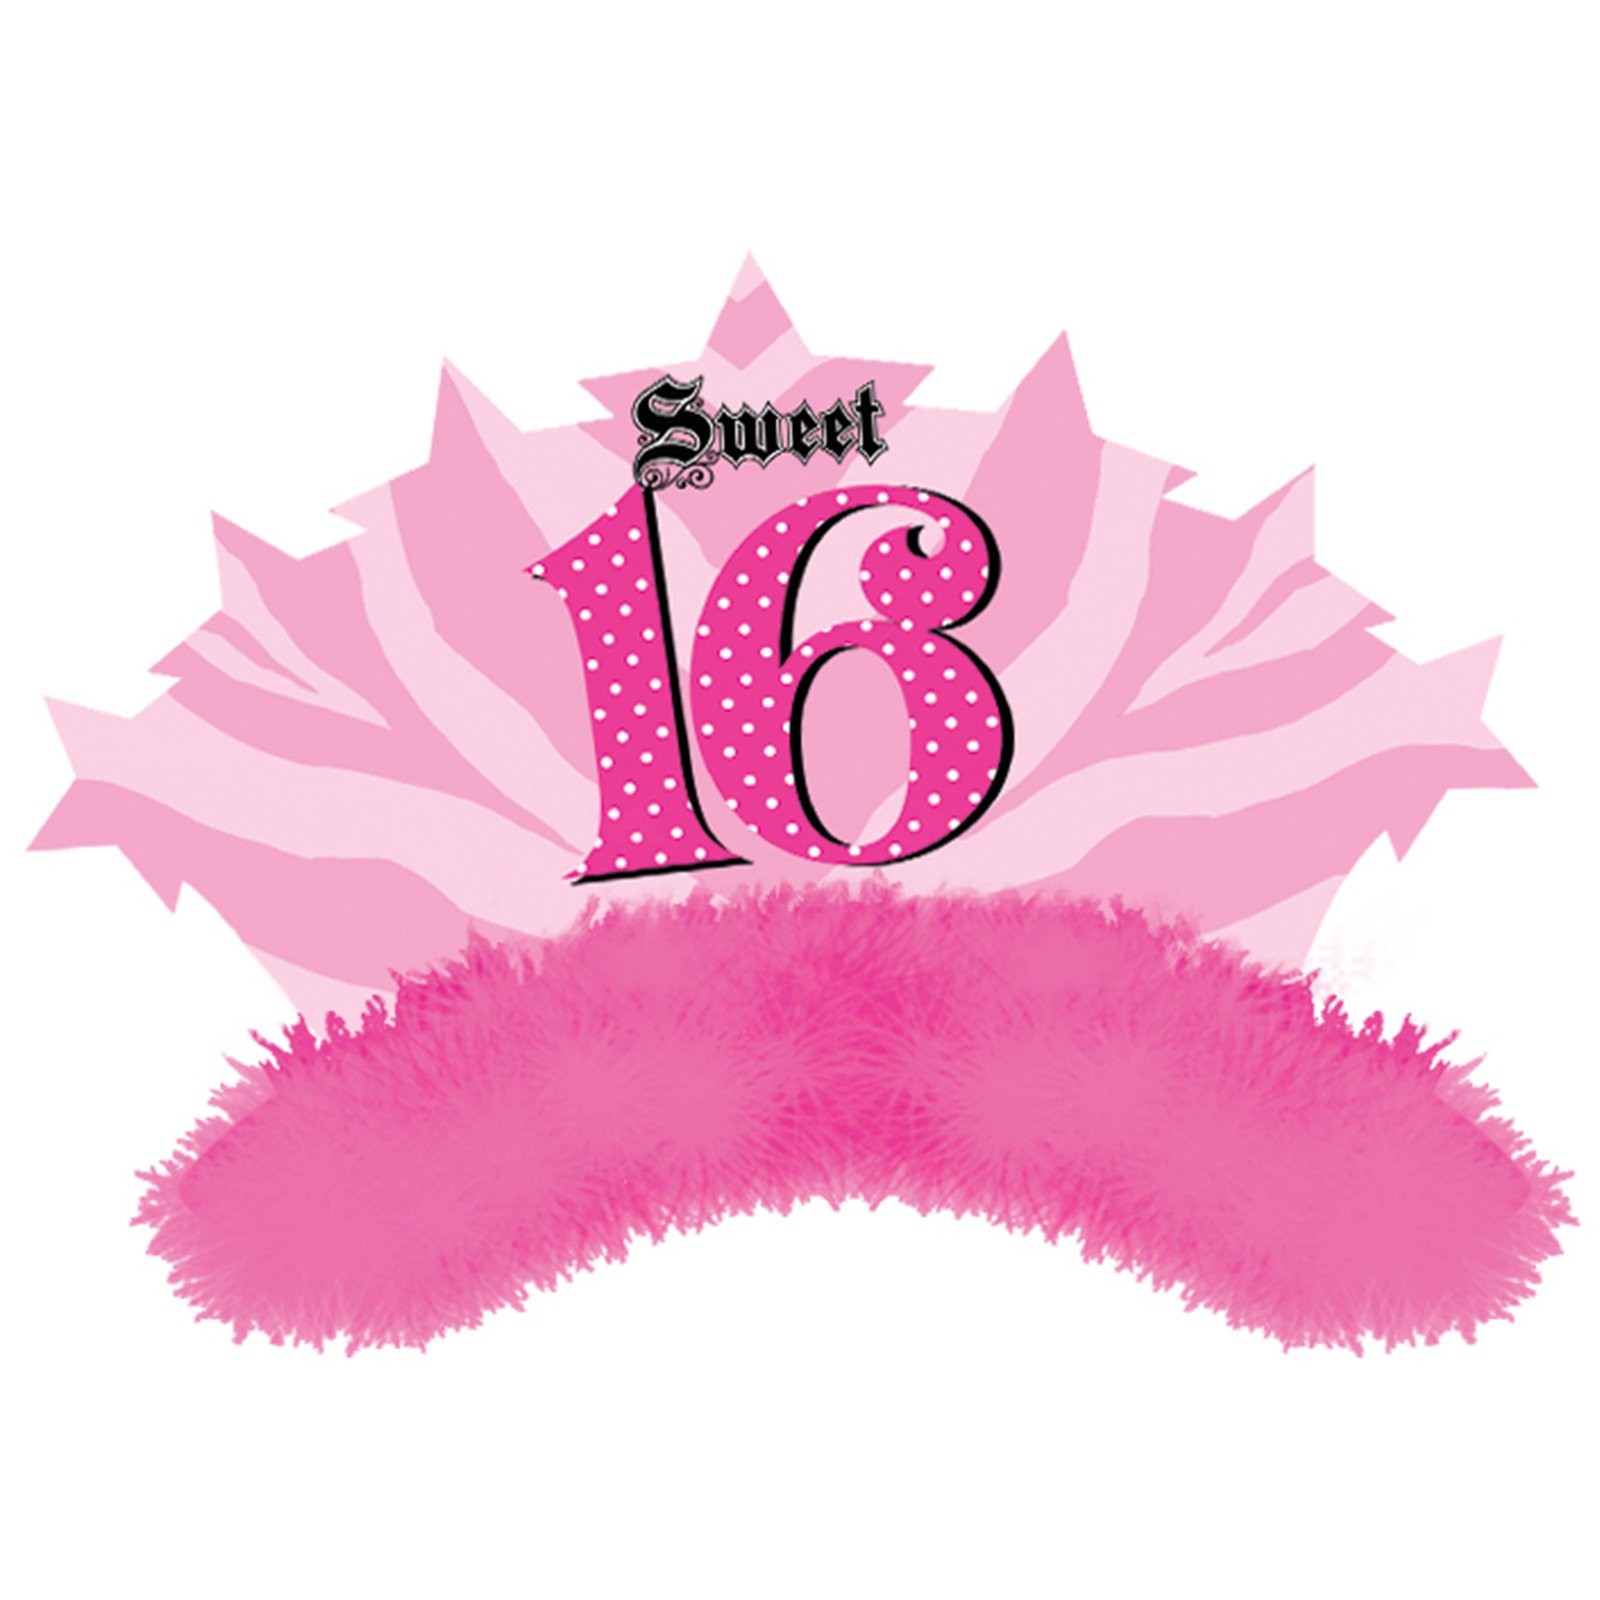 Free Sweet 16 Cliparts, Download Free Clip Art, Free Clip Art on